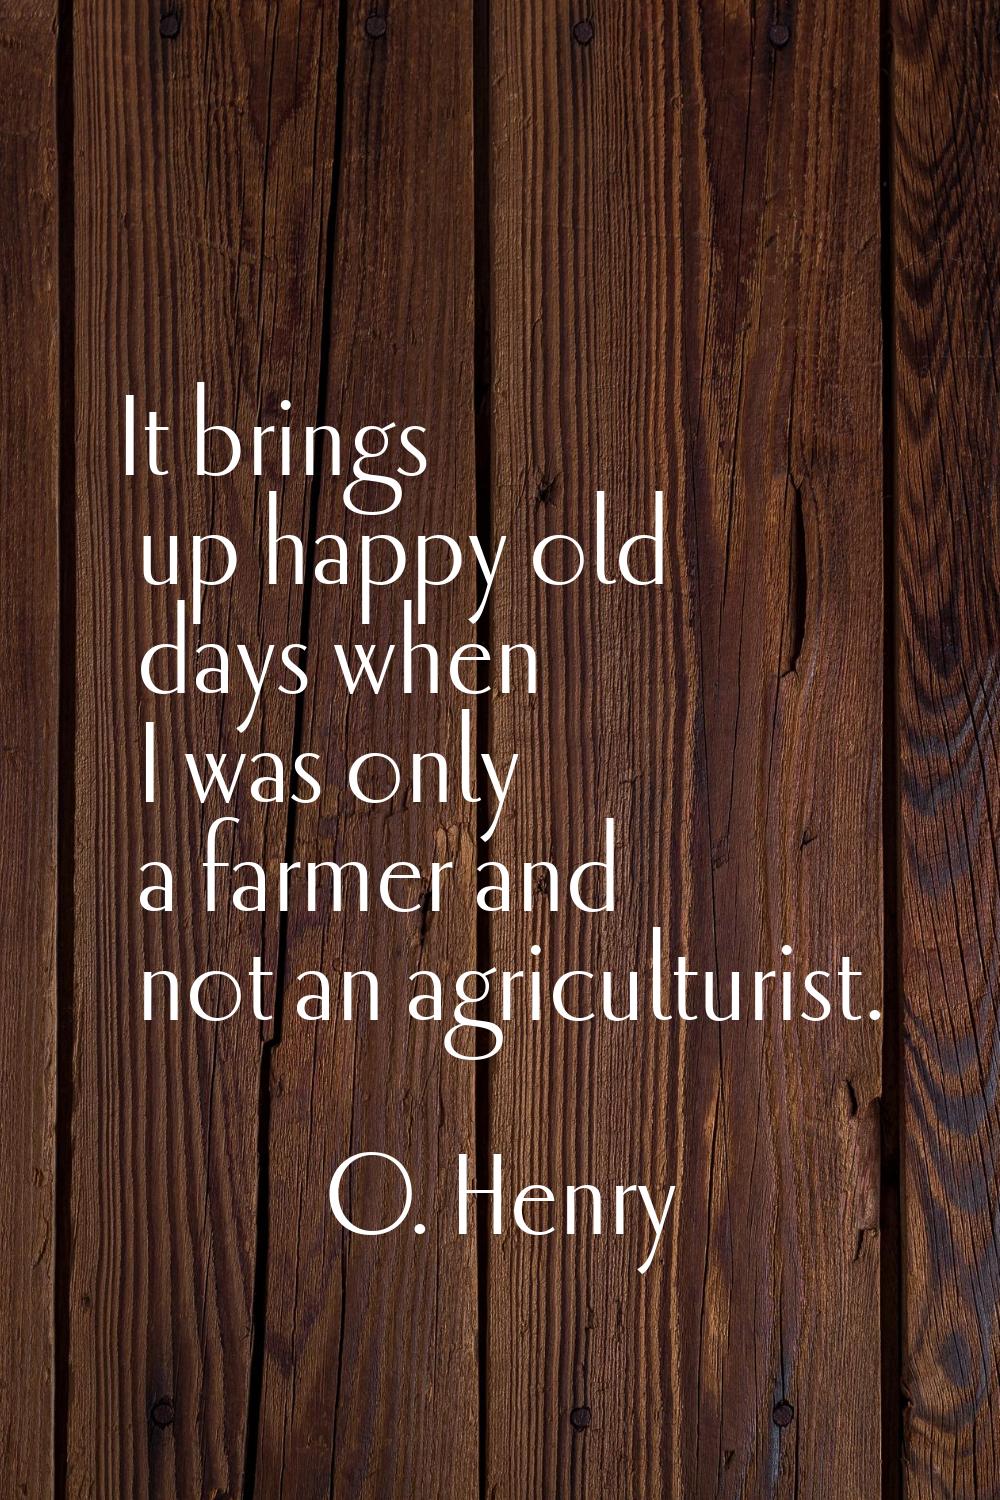 It brings up happy old days when I was only a farmer and not an agriculturist.